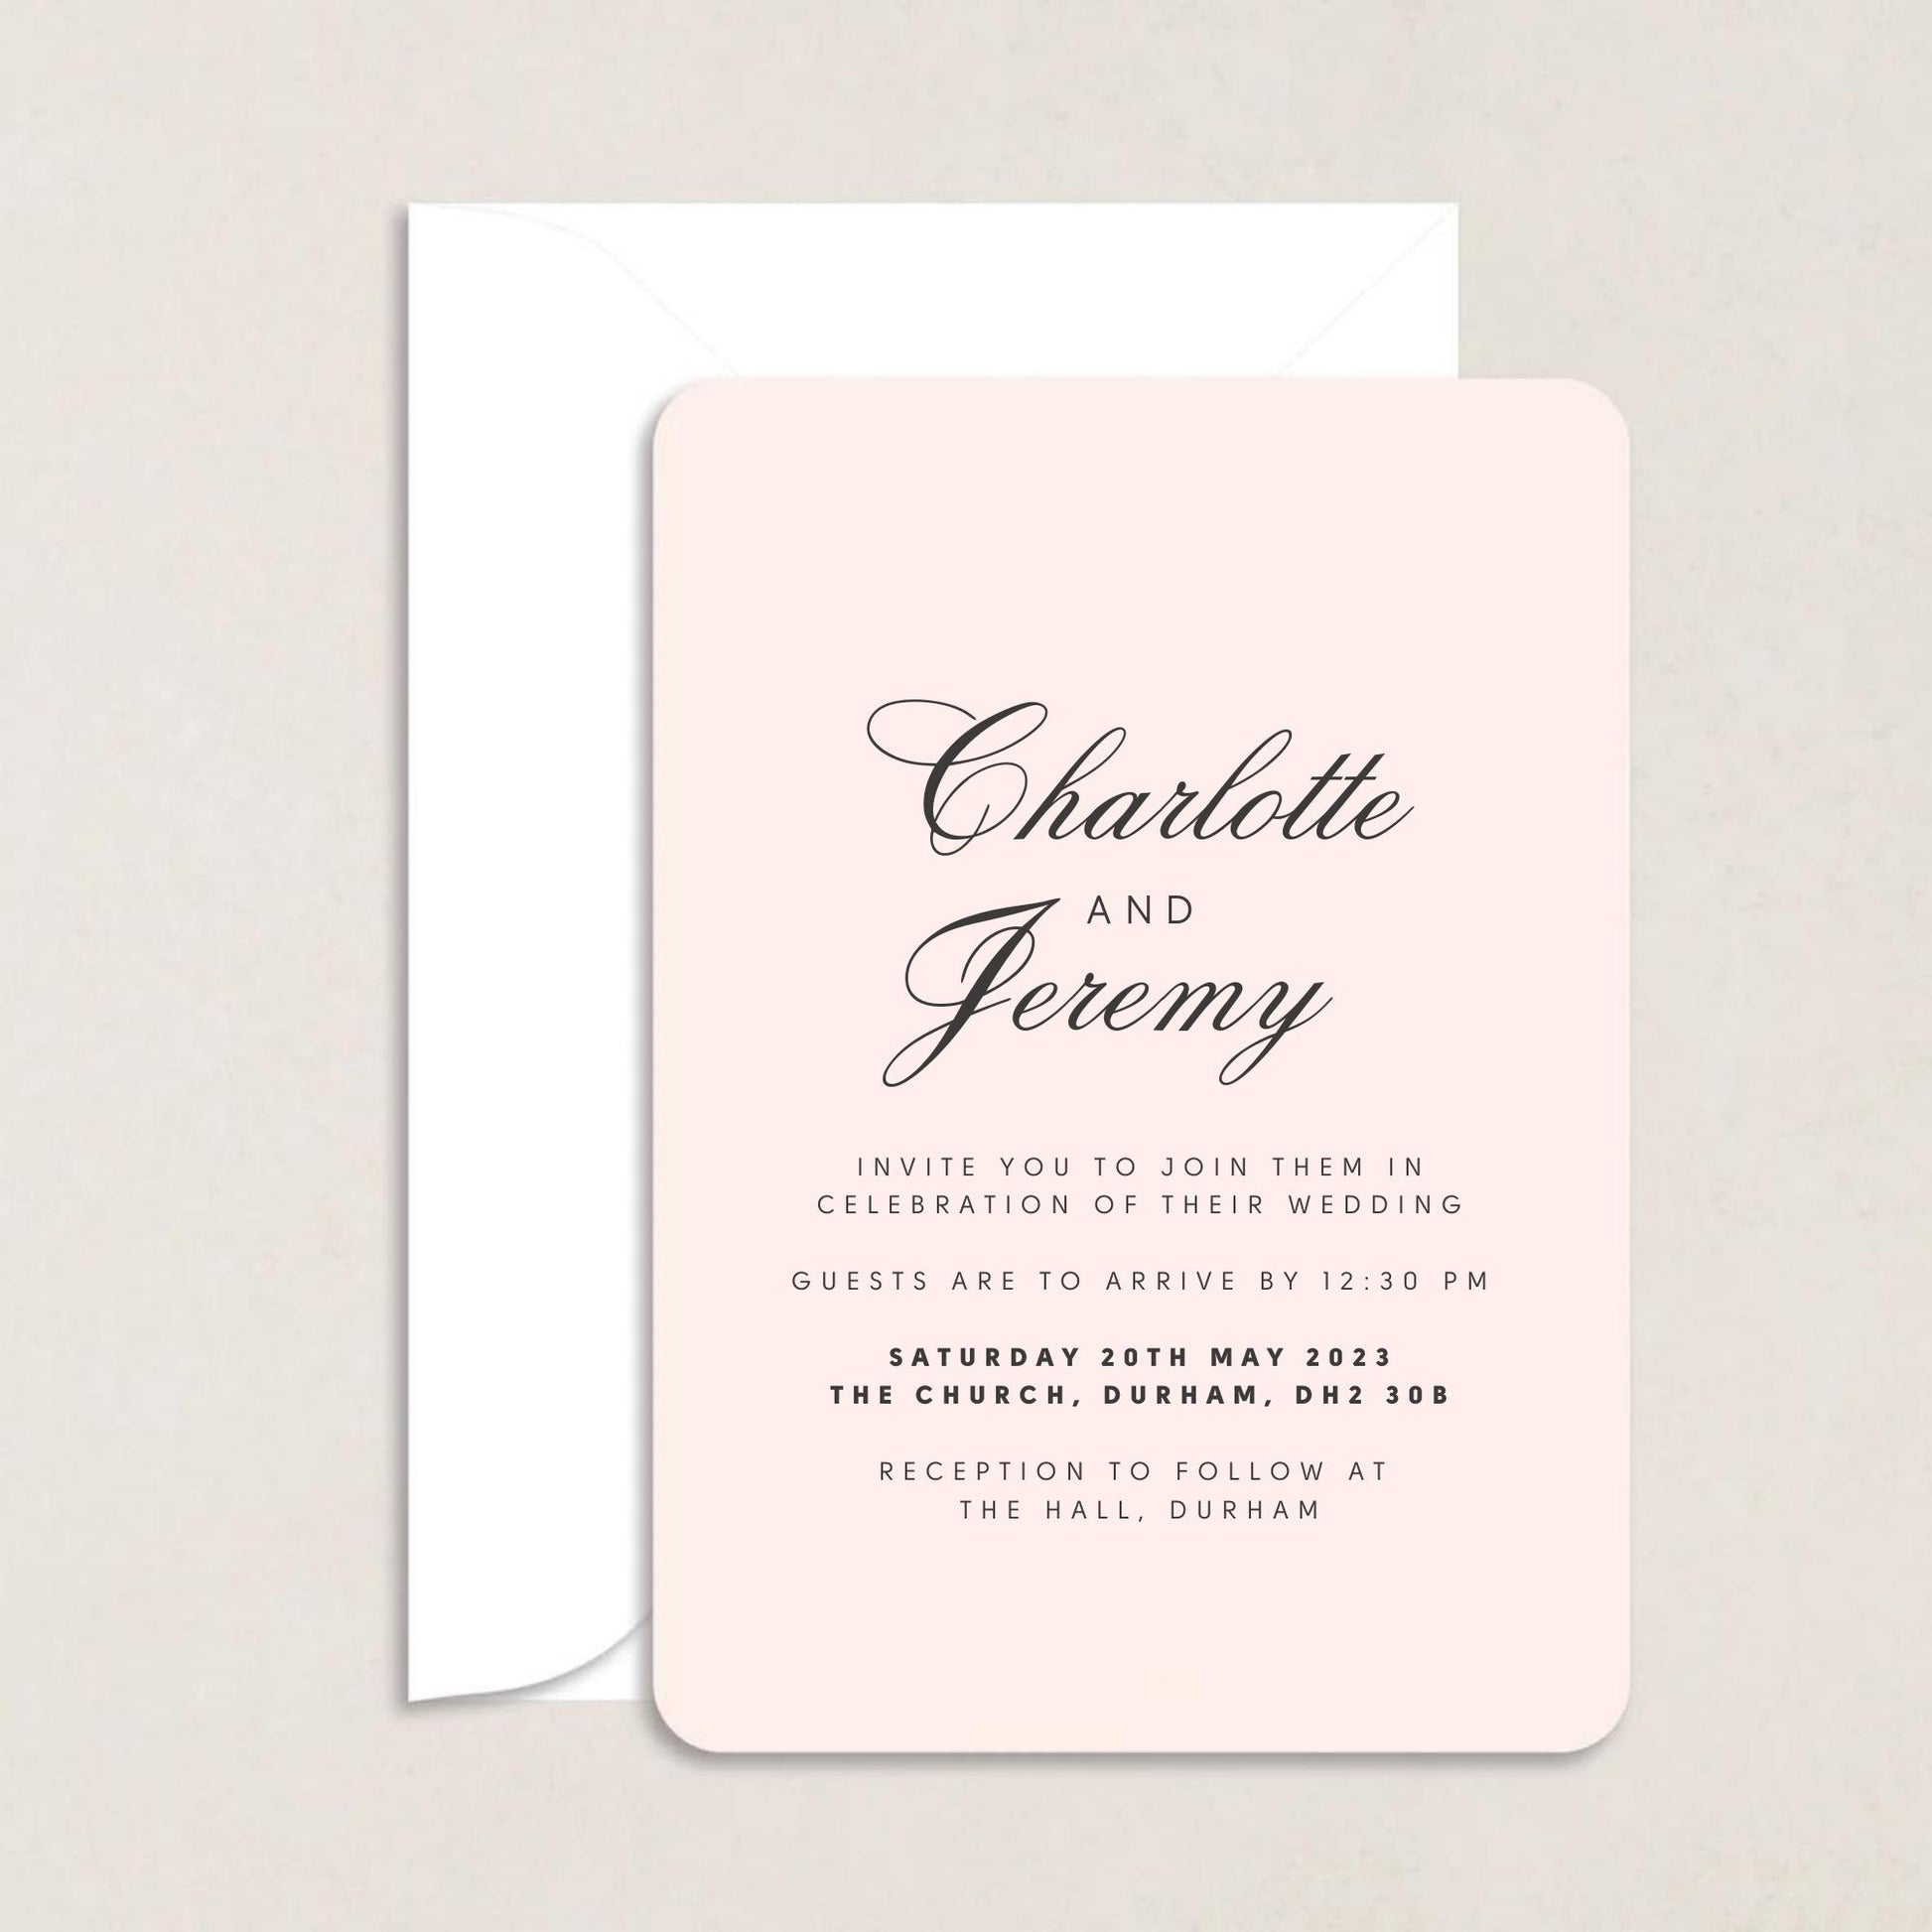 Charlotte Wedding Invitations - Wedding Invitations available at The Ivy Collection | Luxury Wedding Stationery